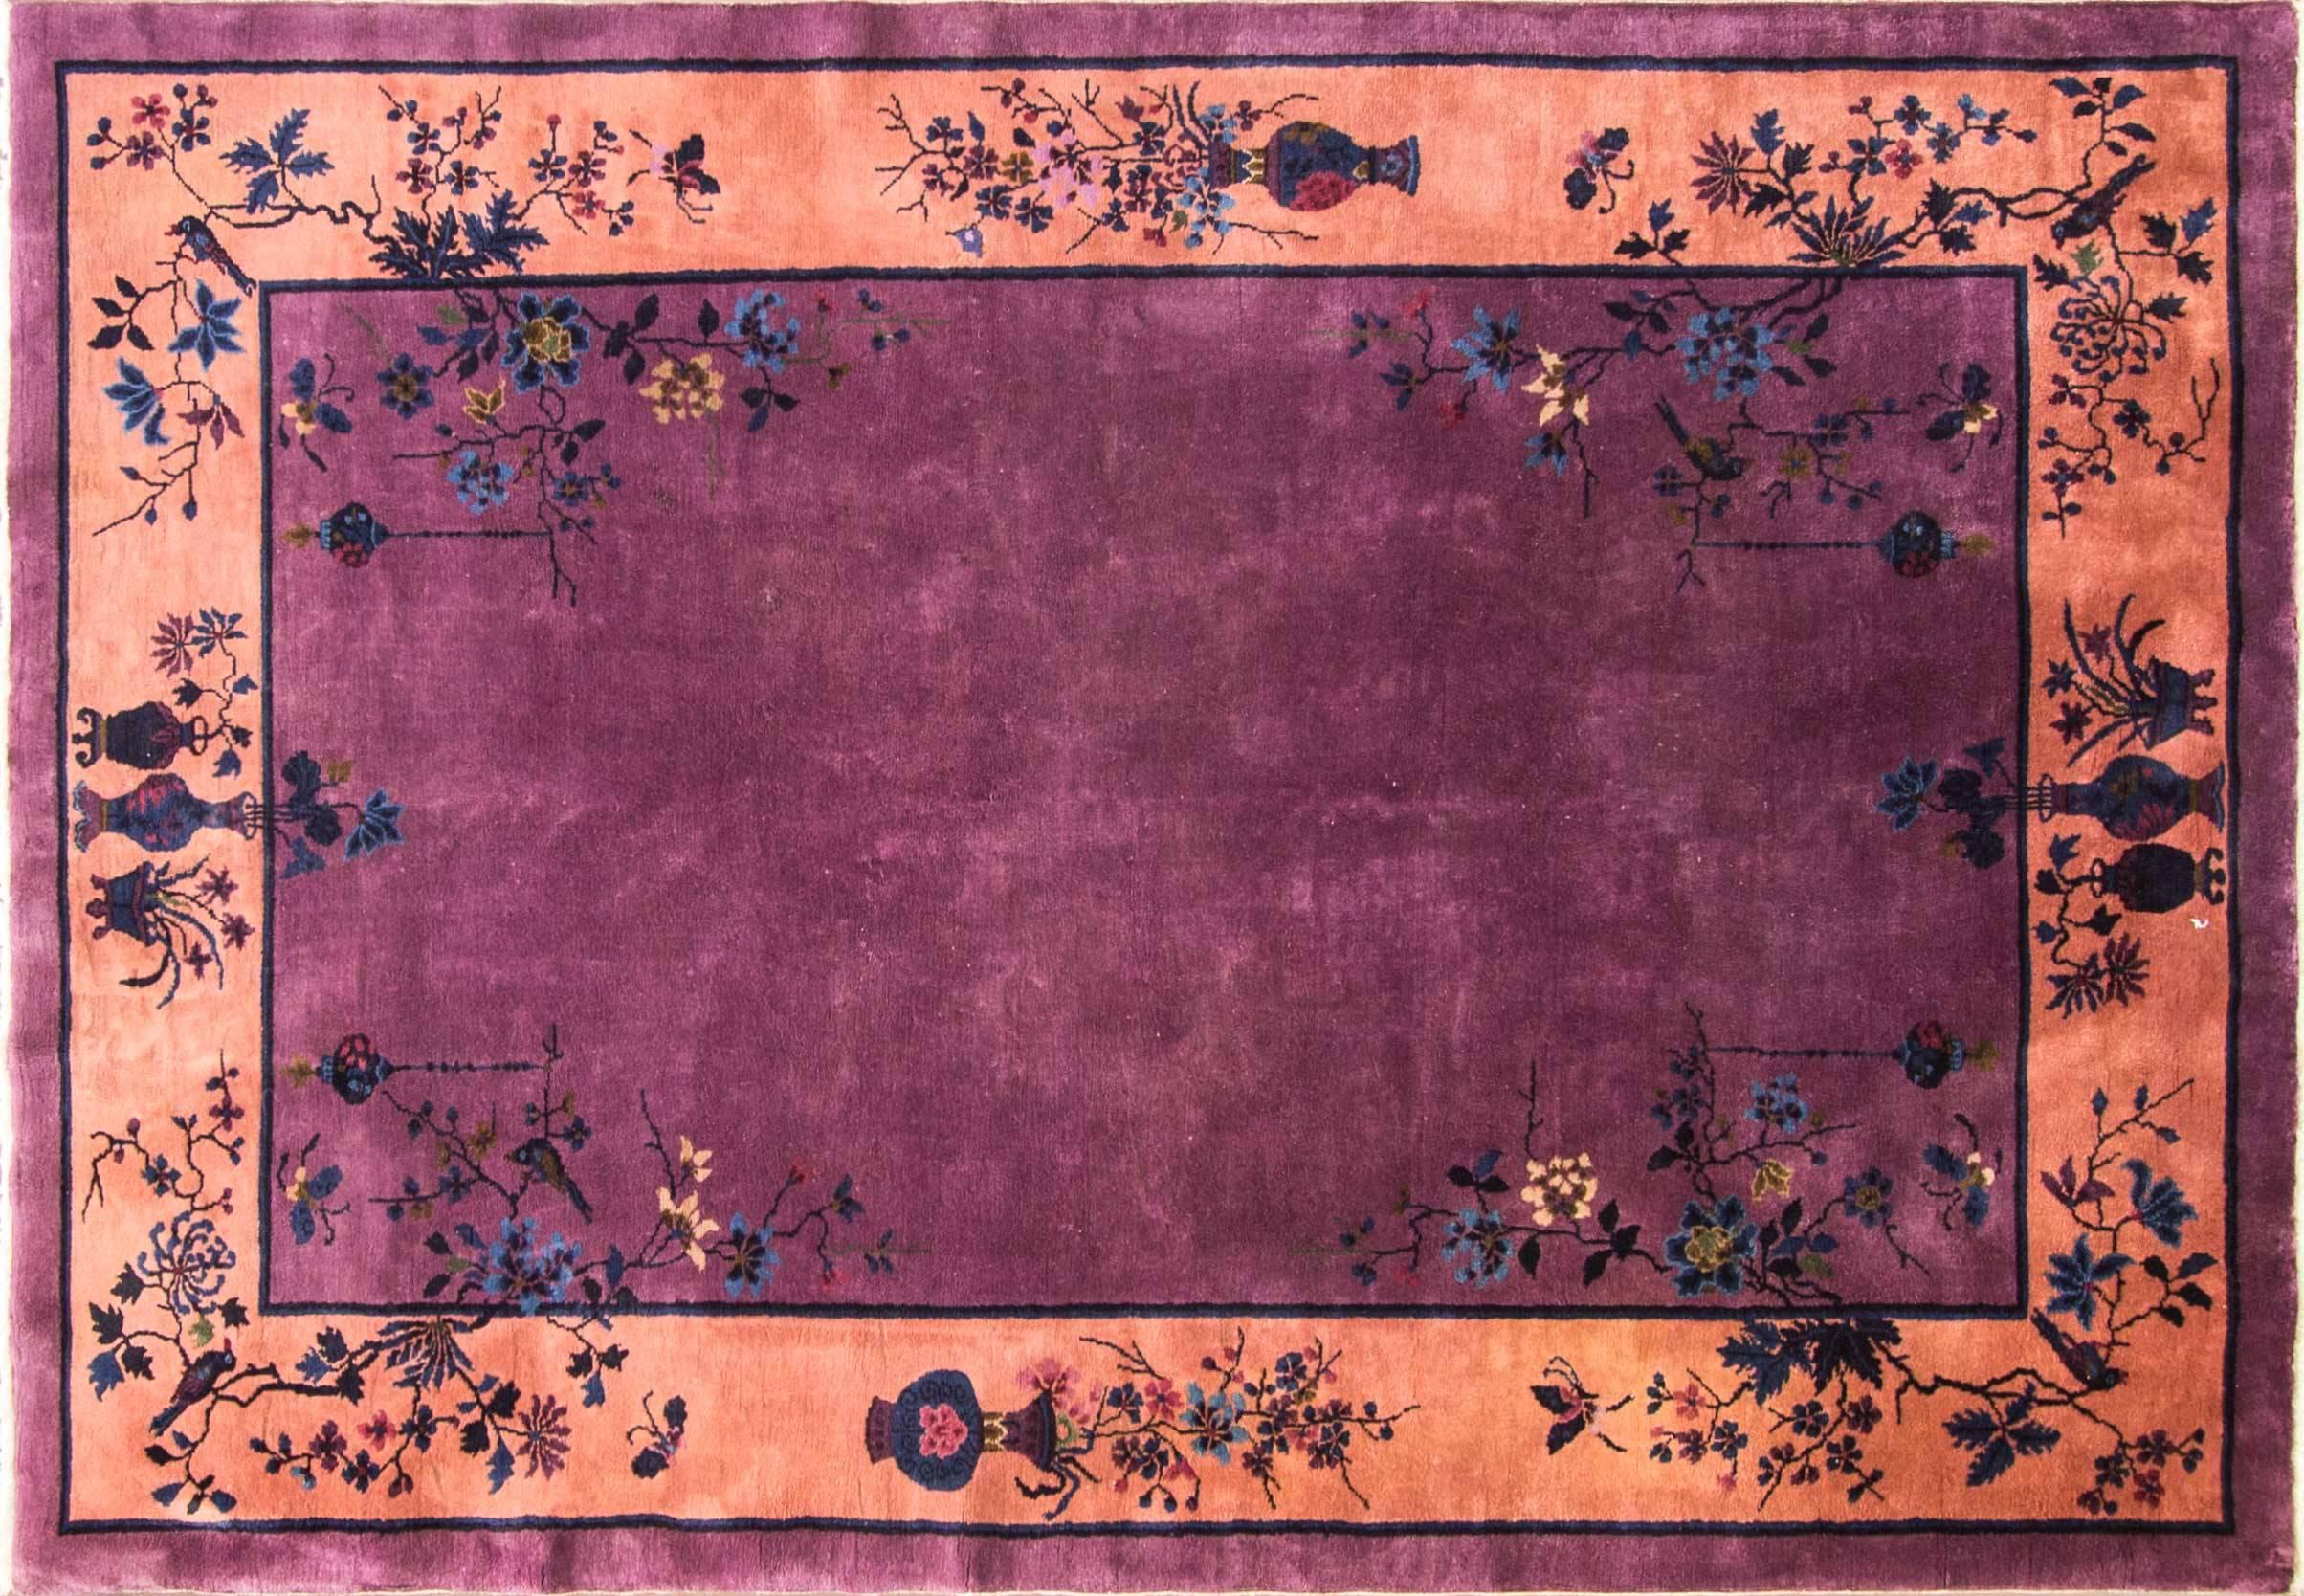 This wonderful Art Deco carpet was made in China, circa 1910s or 1920s. Walter Nichols was great American rug producer (the Art Deco rugs which he did not originate them) in Tientsin. The rugs made of wool and silk with bold vibrant colors and the